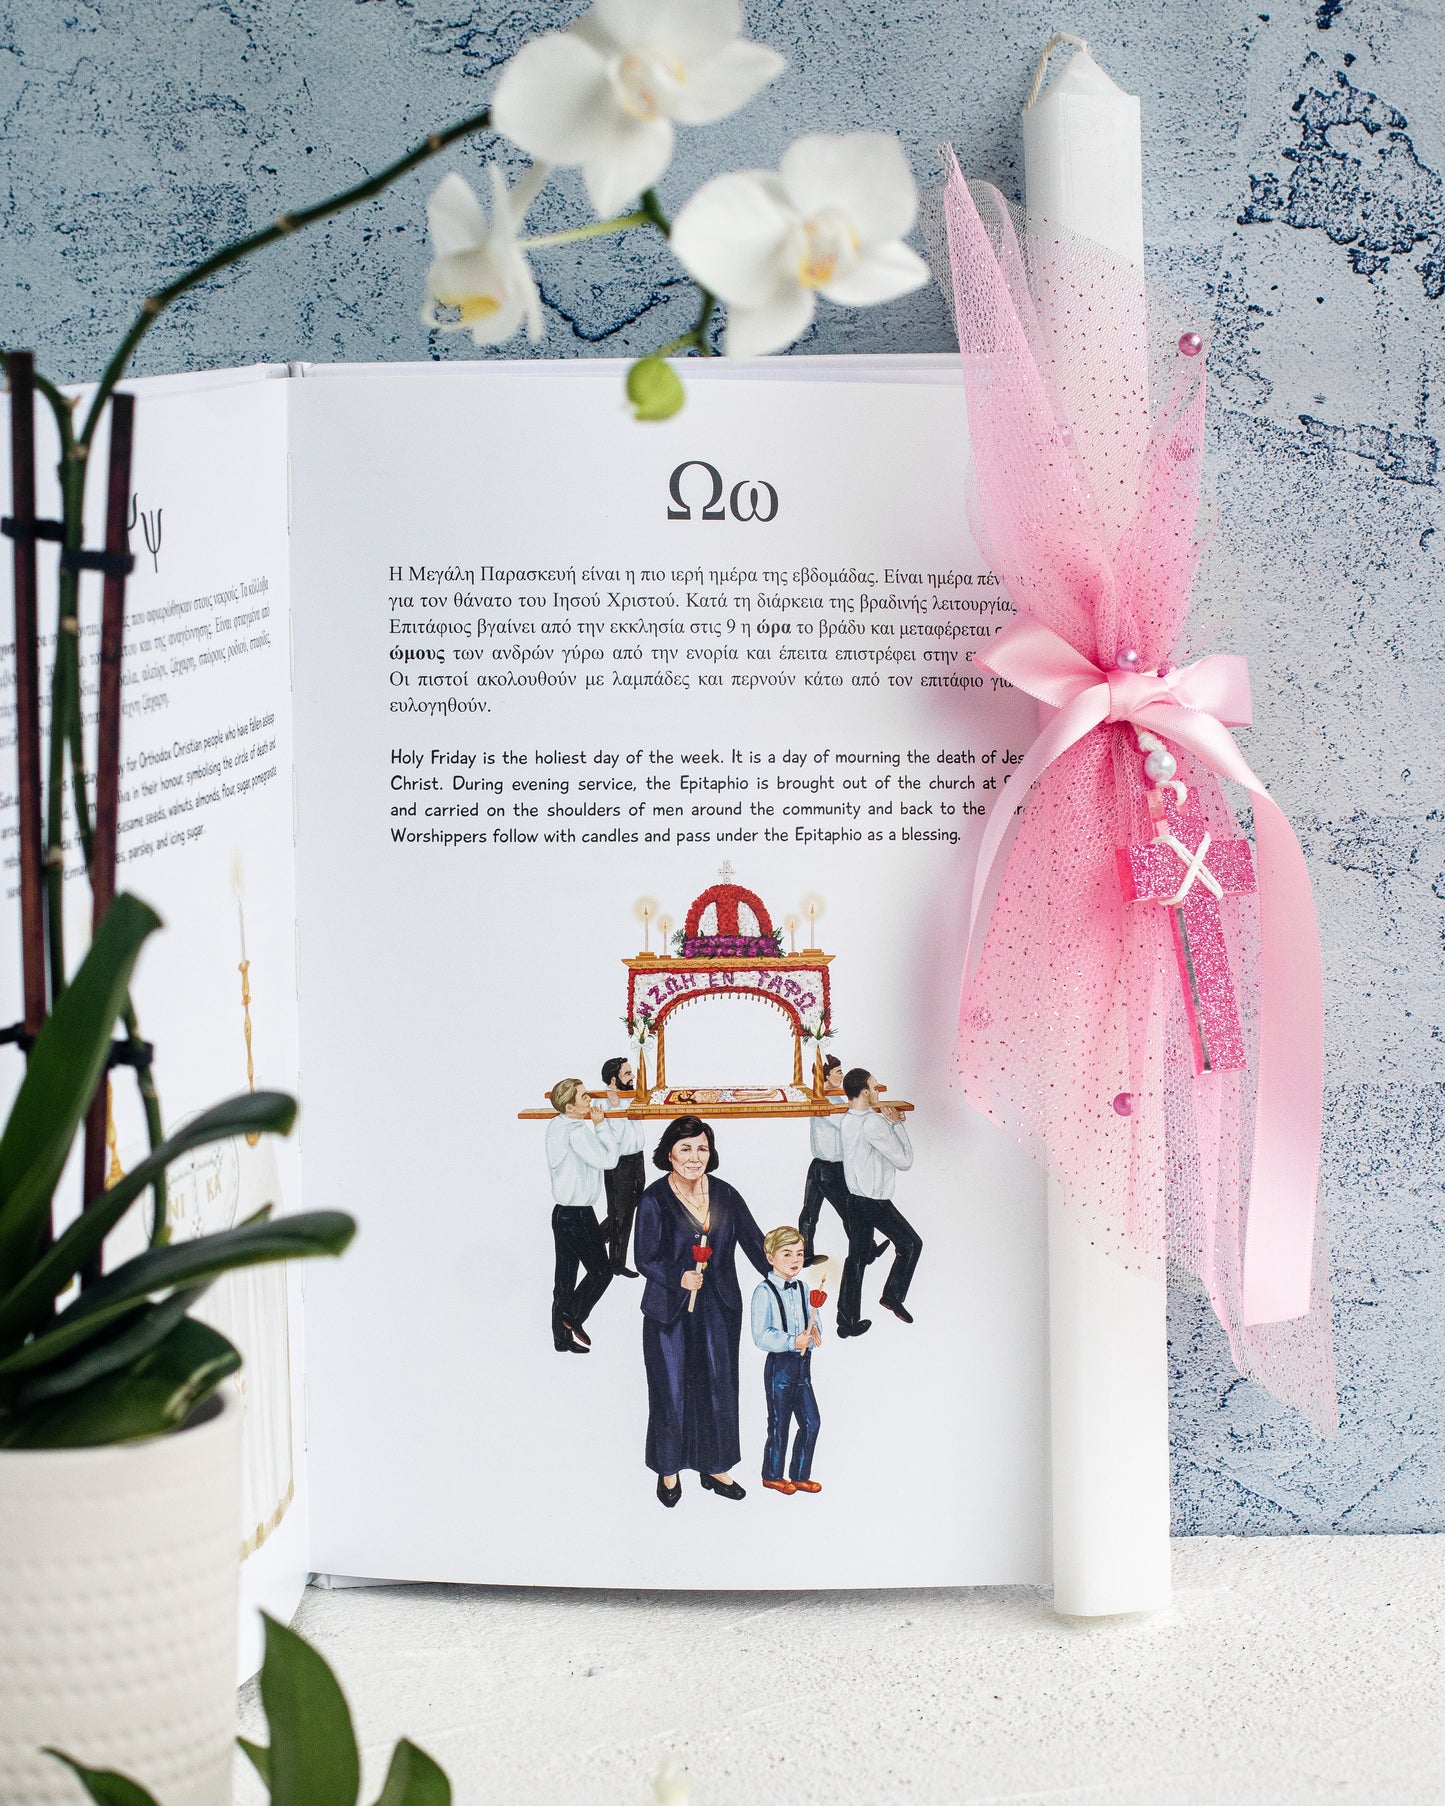 The ABC of Greek Easter Hardcover Book